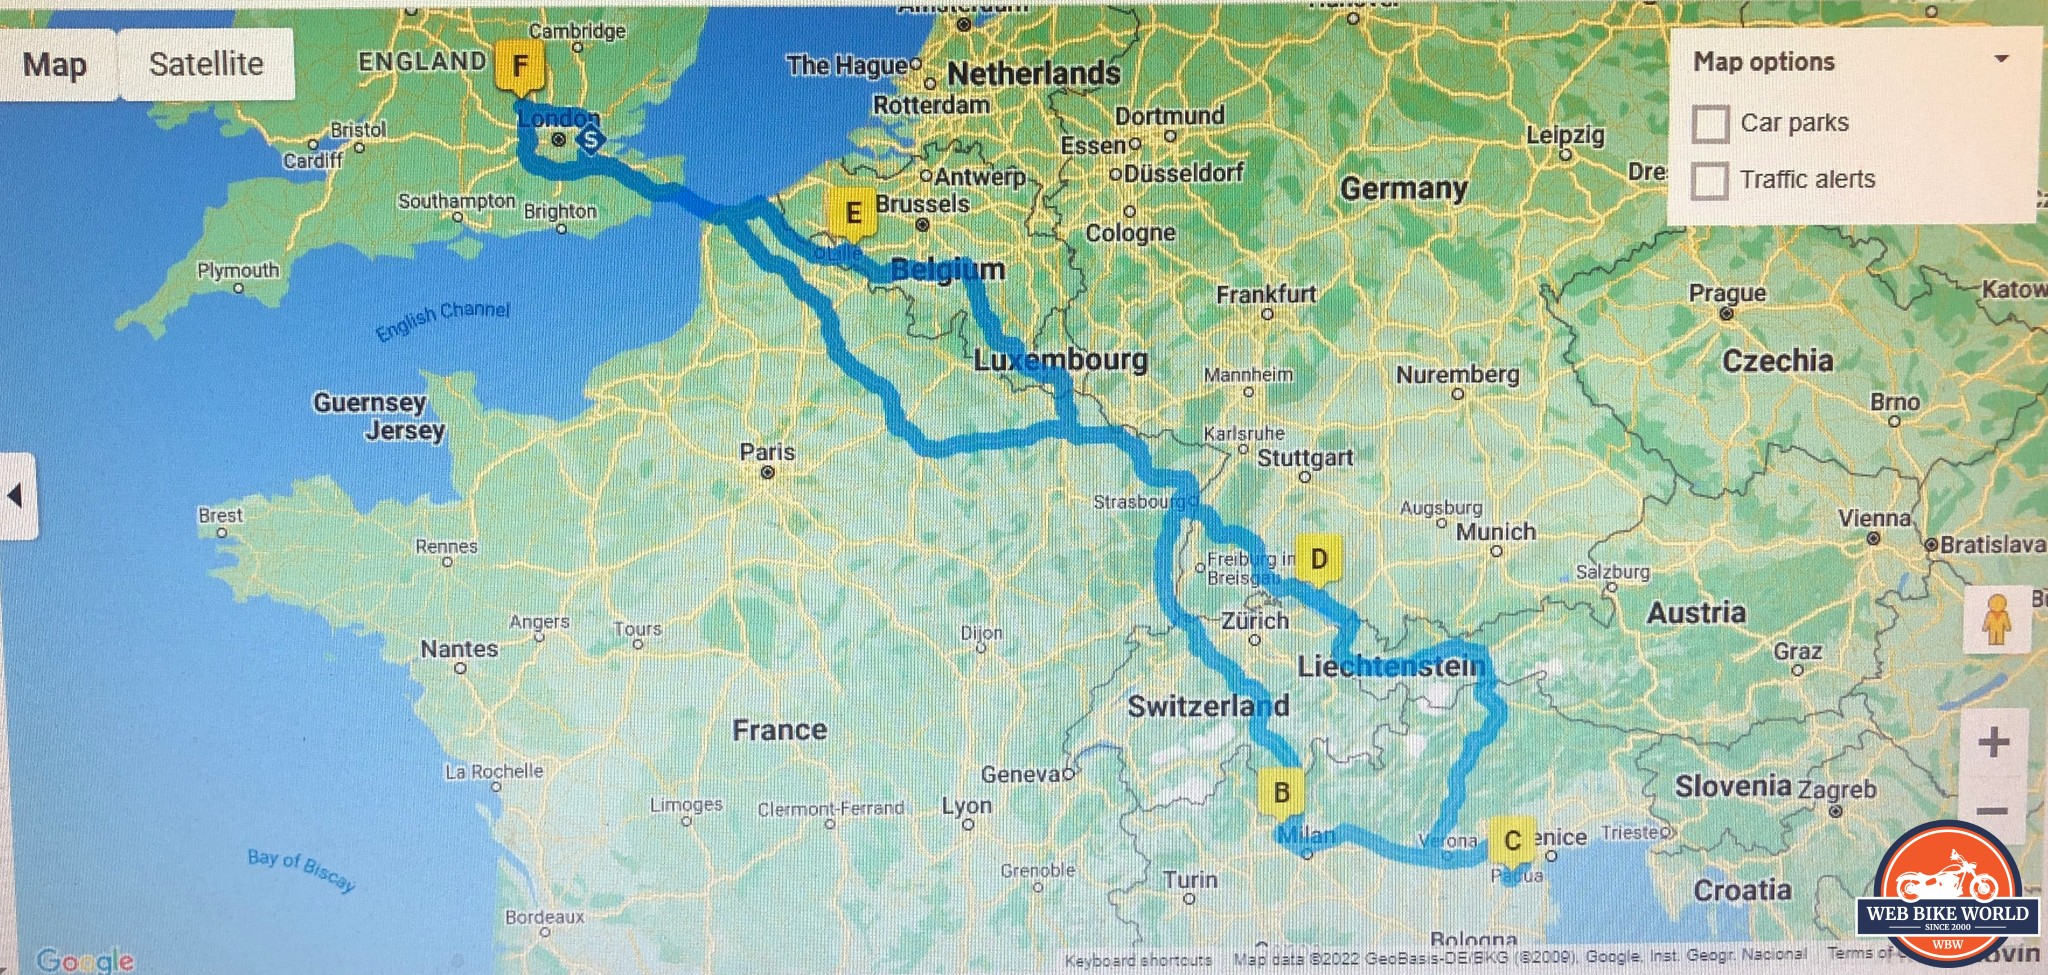 The total distance of the Europe bike trip